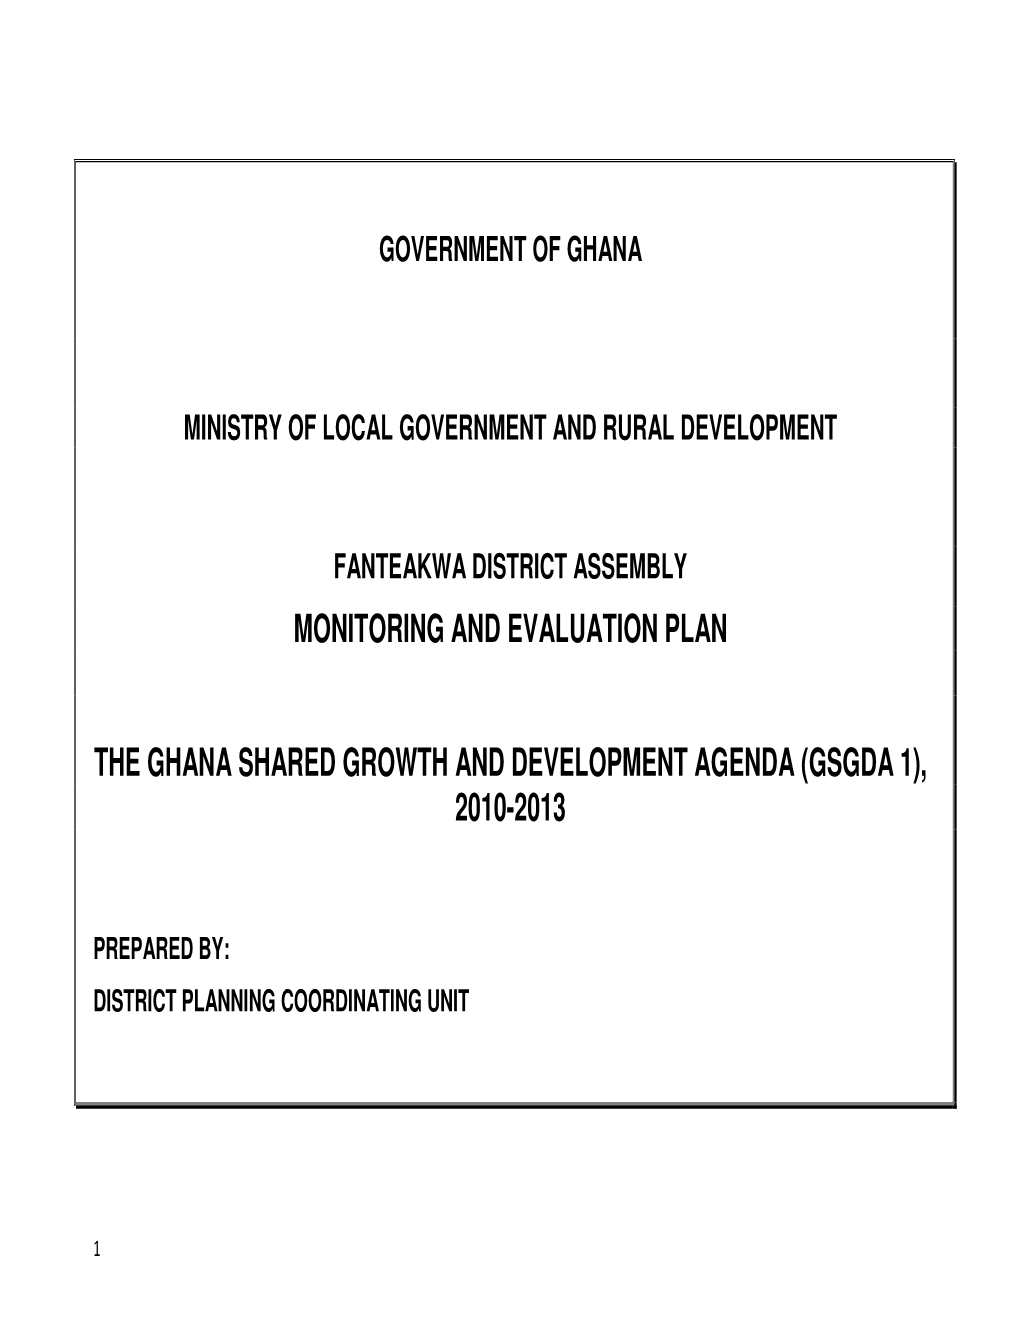 Monitoring and Evaluation Plan the Ghana Shared